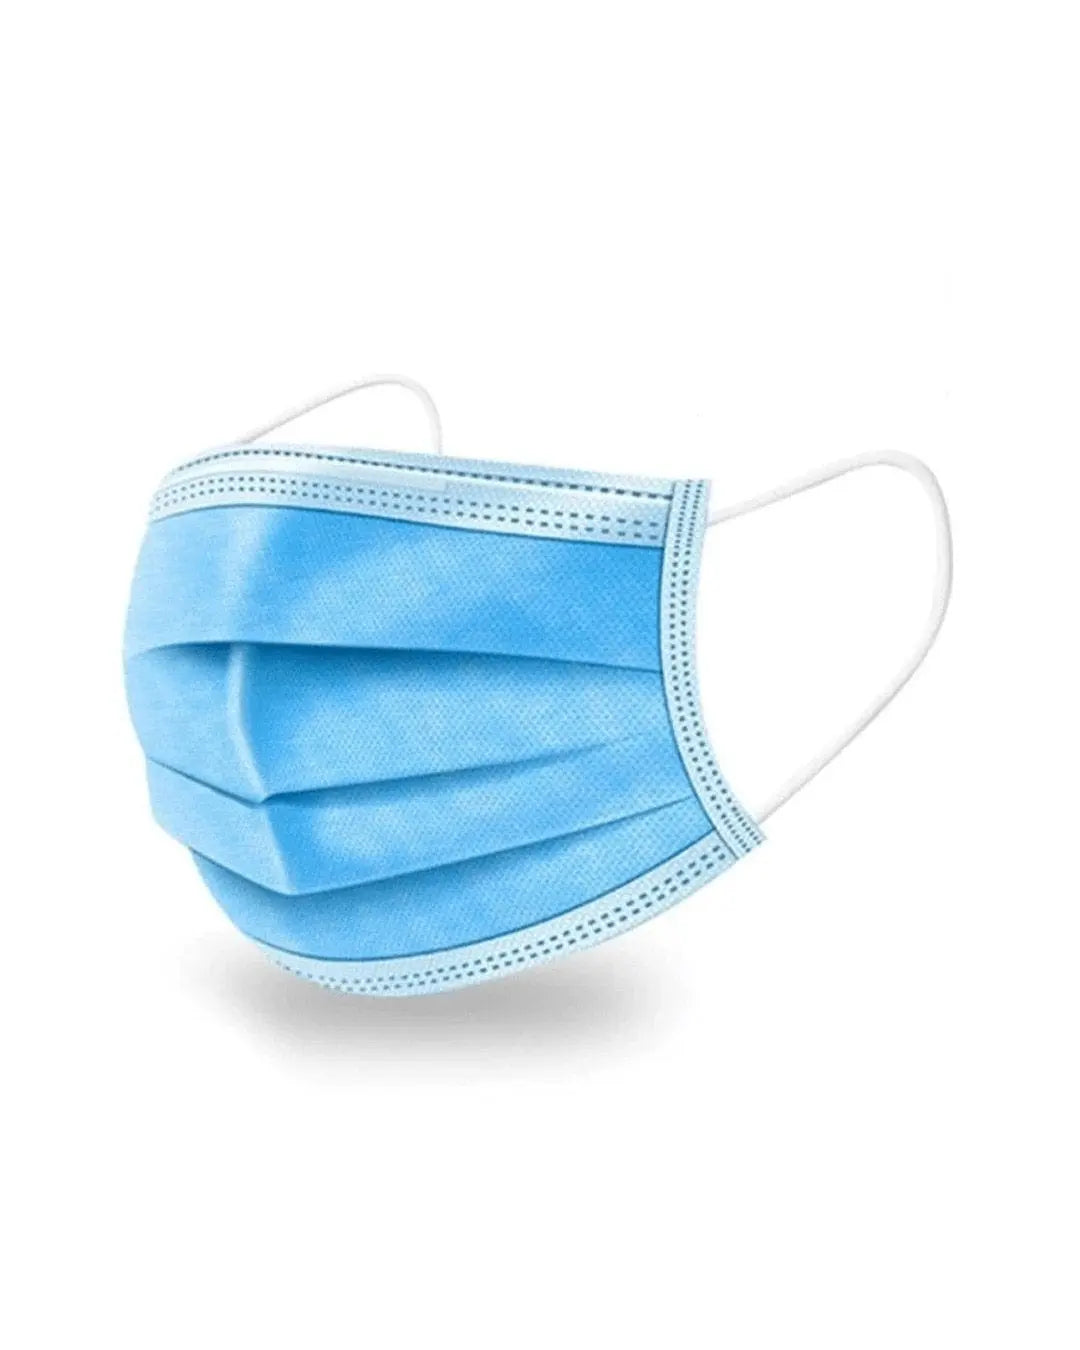 3 Ply Disposable Mask, Pack of 50 PPE